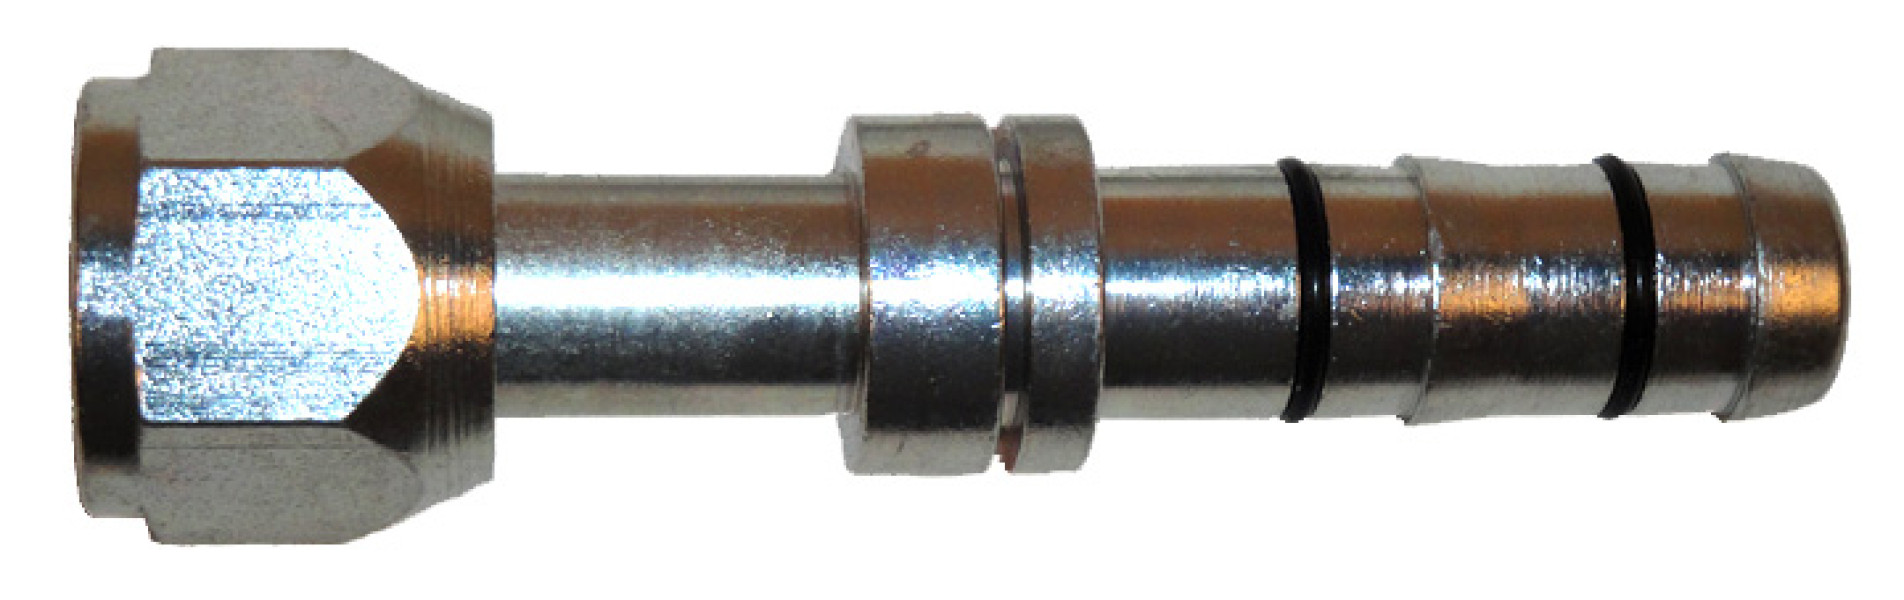 Image of A/C Refrigerant Hose Fitting from Sunair. Part number: FF14179